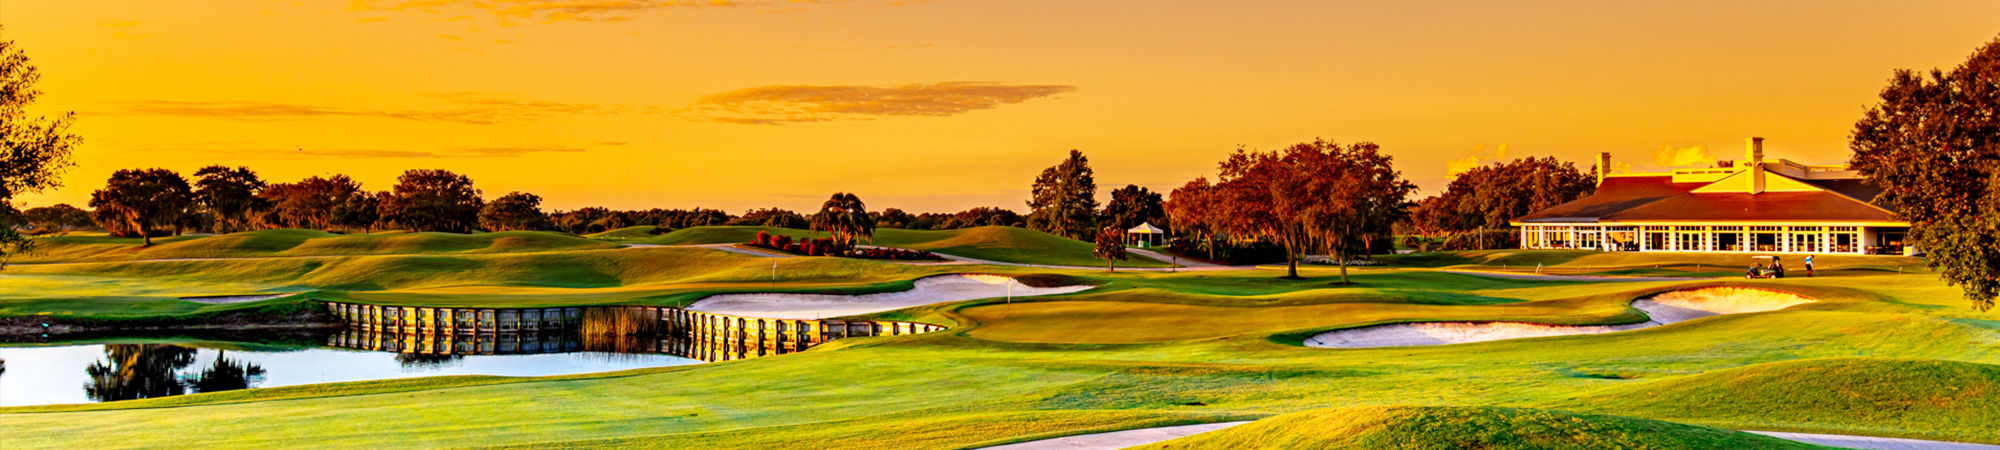 Play the best golf course in sarasota at laurel oak country club